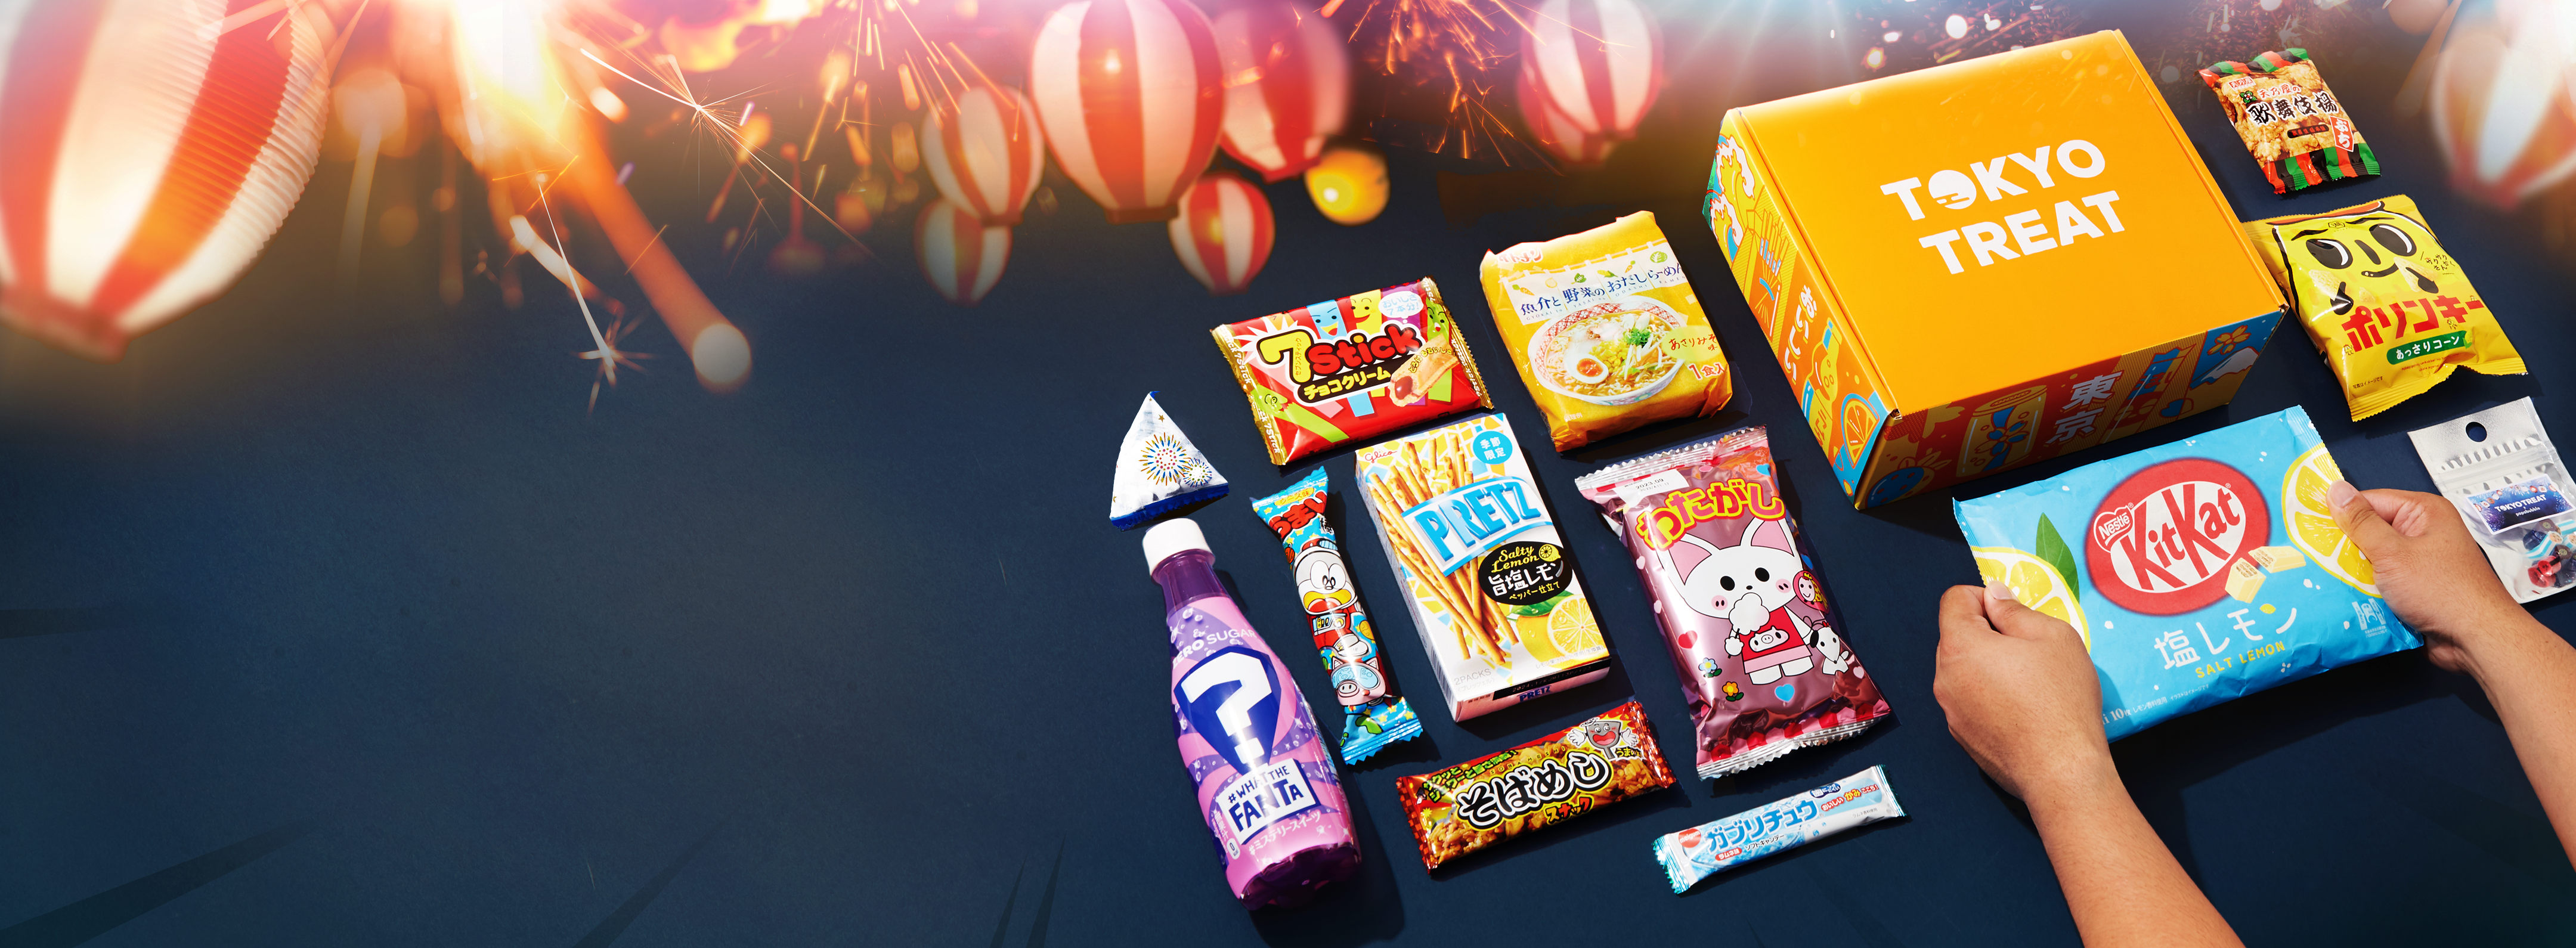 TokyoTreat box sits on a dark navy background, surrounded by Japanese festival lanterns.